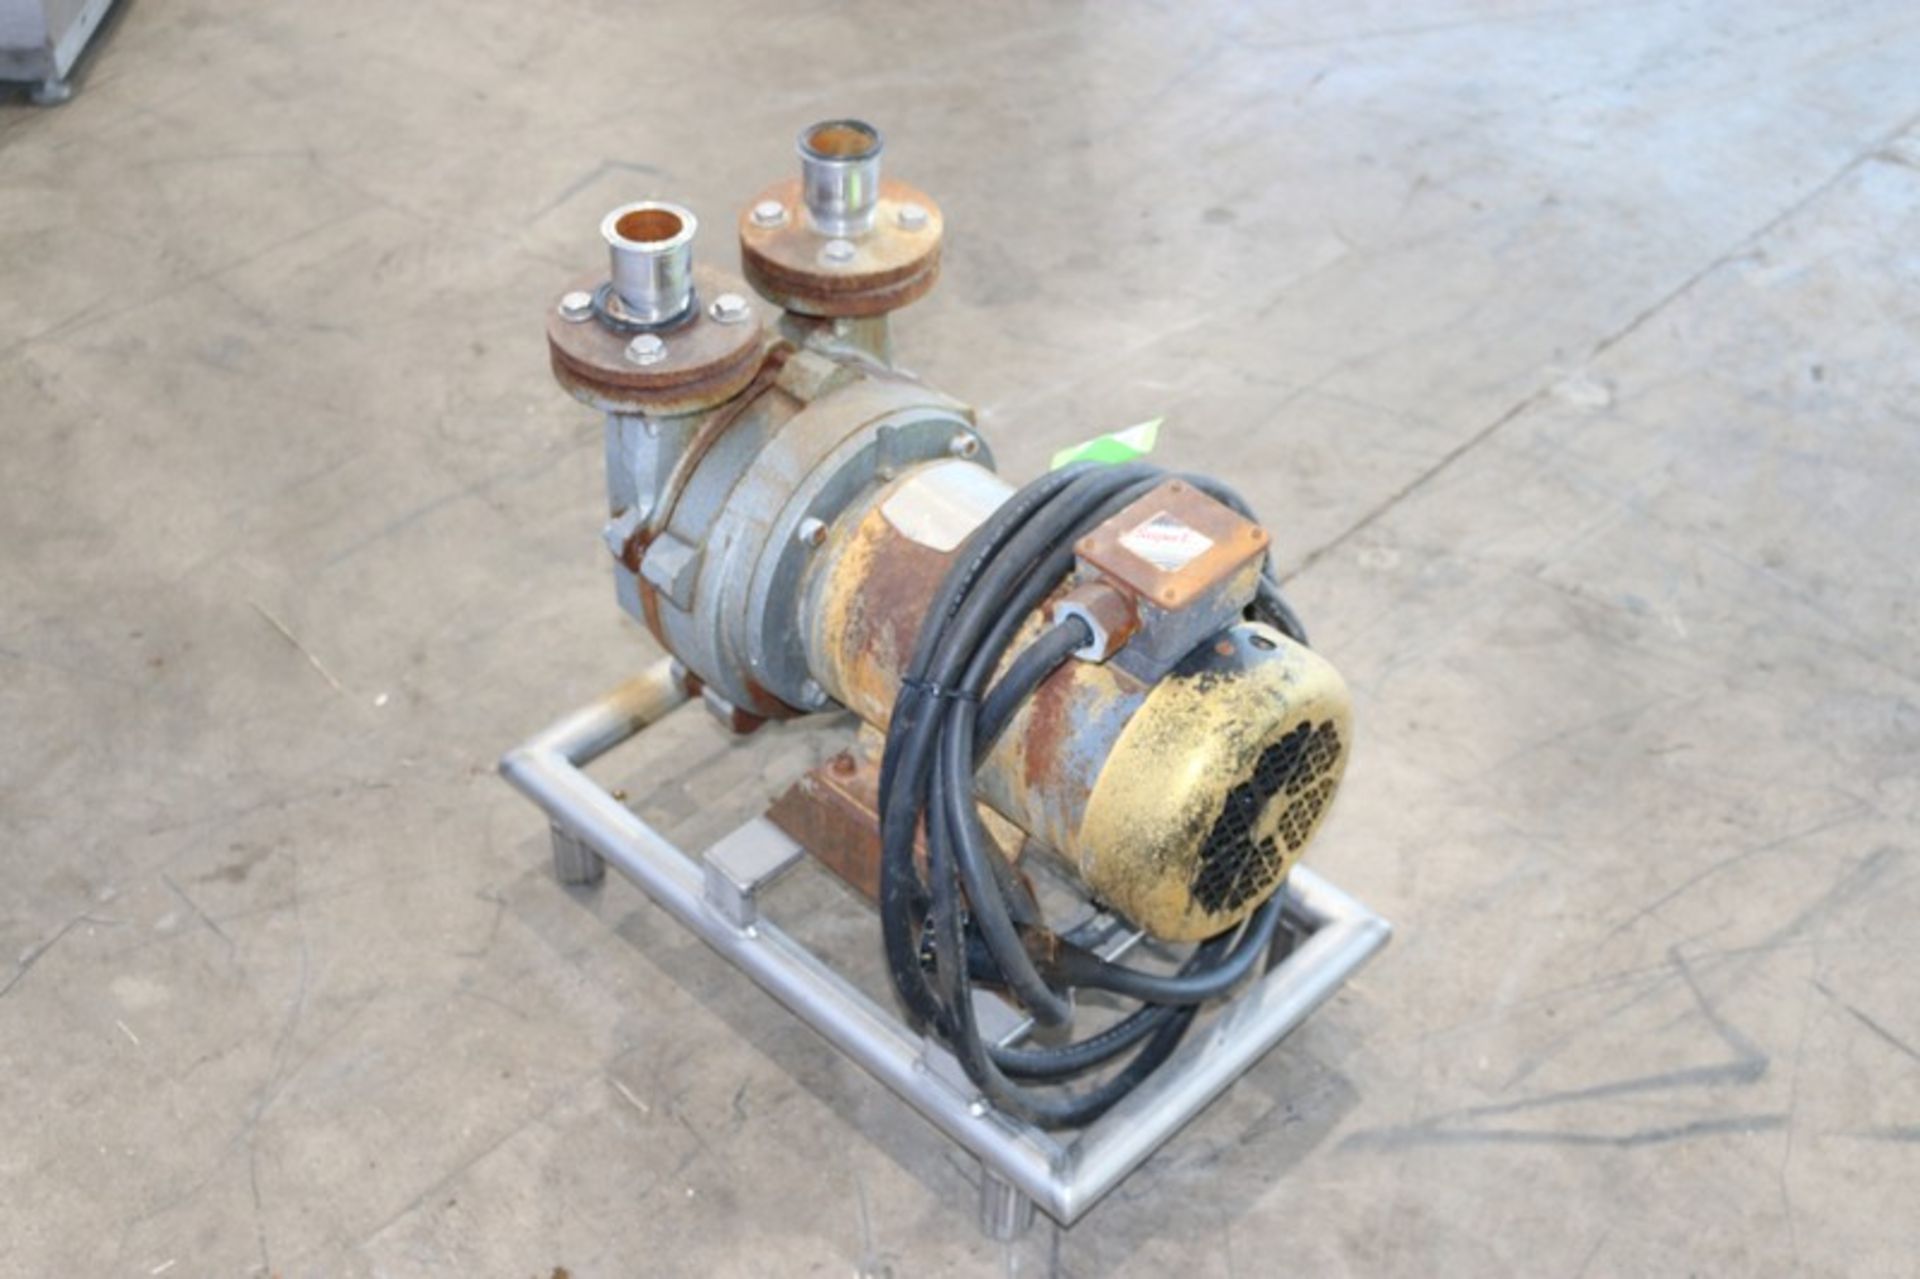 Buusch Vacuum Pump,with Baldor 1755 RPM Motor, 208-230/460 Volts, 3 Phase, with Associated Steam - Image 4 of 5